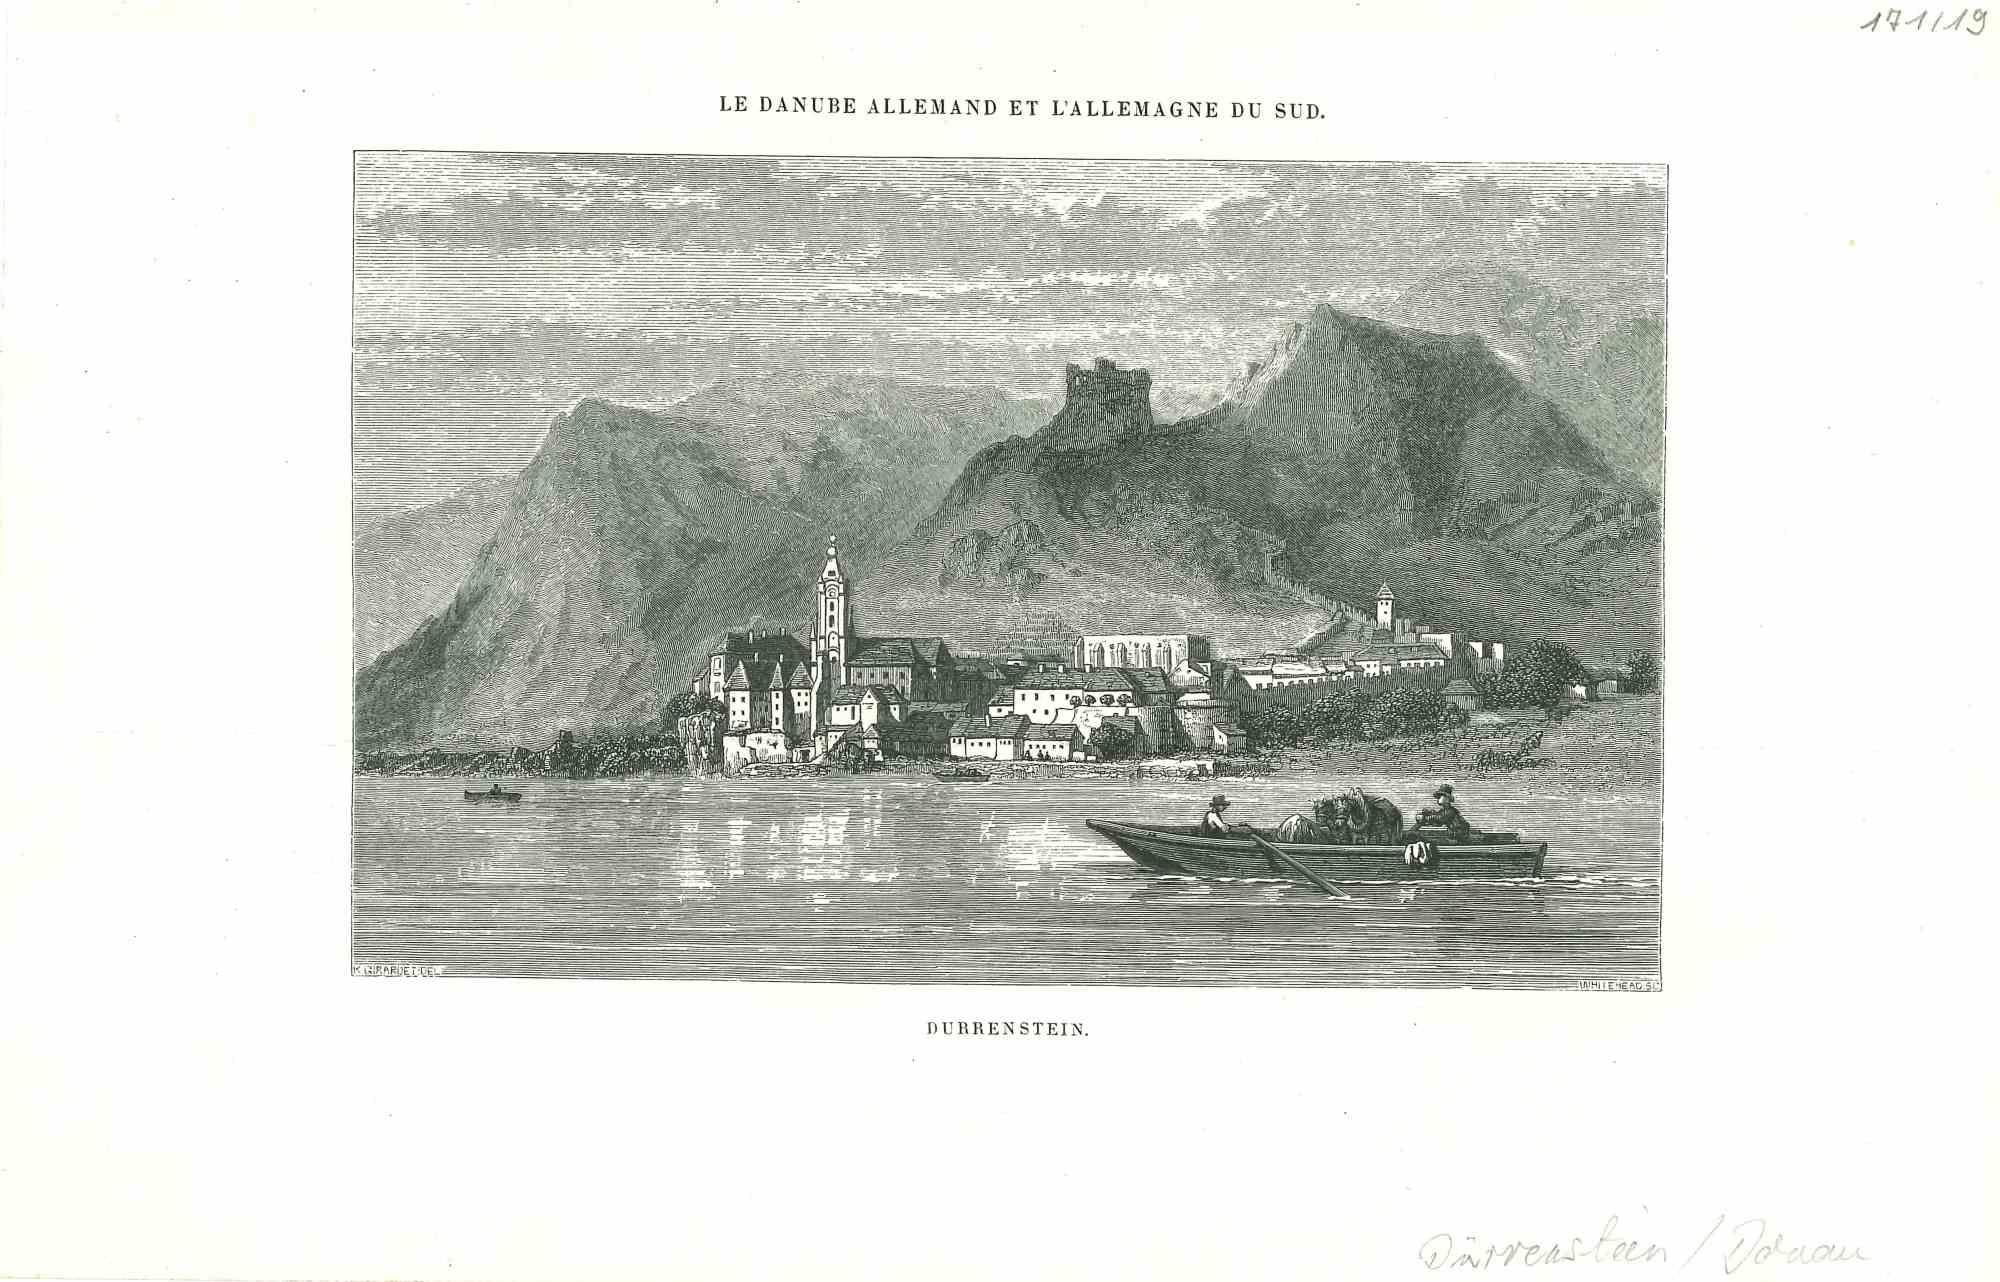 Unknown Figurative Print - Ancient View of Durrenstein - Original Lithograph - Mid-19th Century